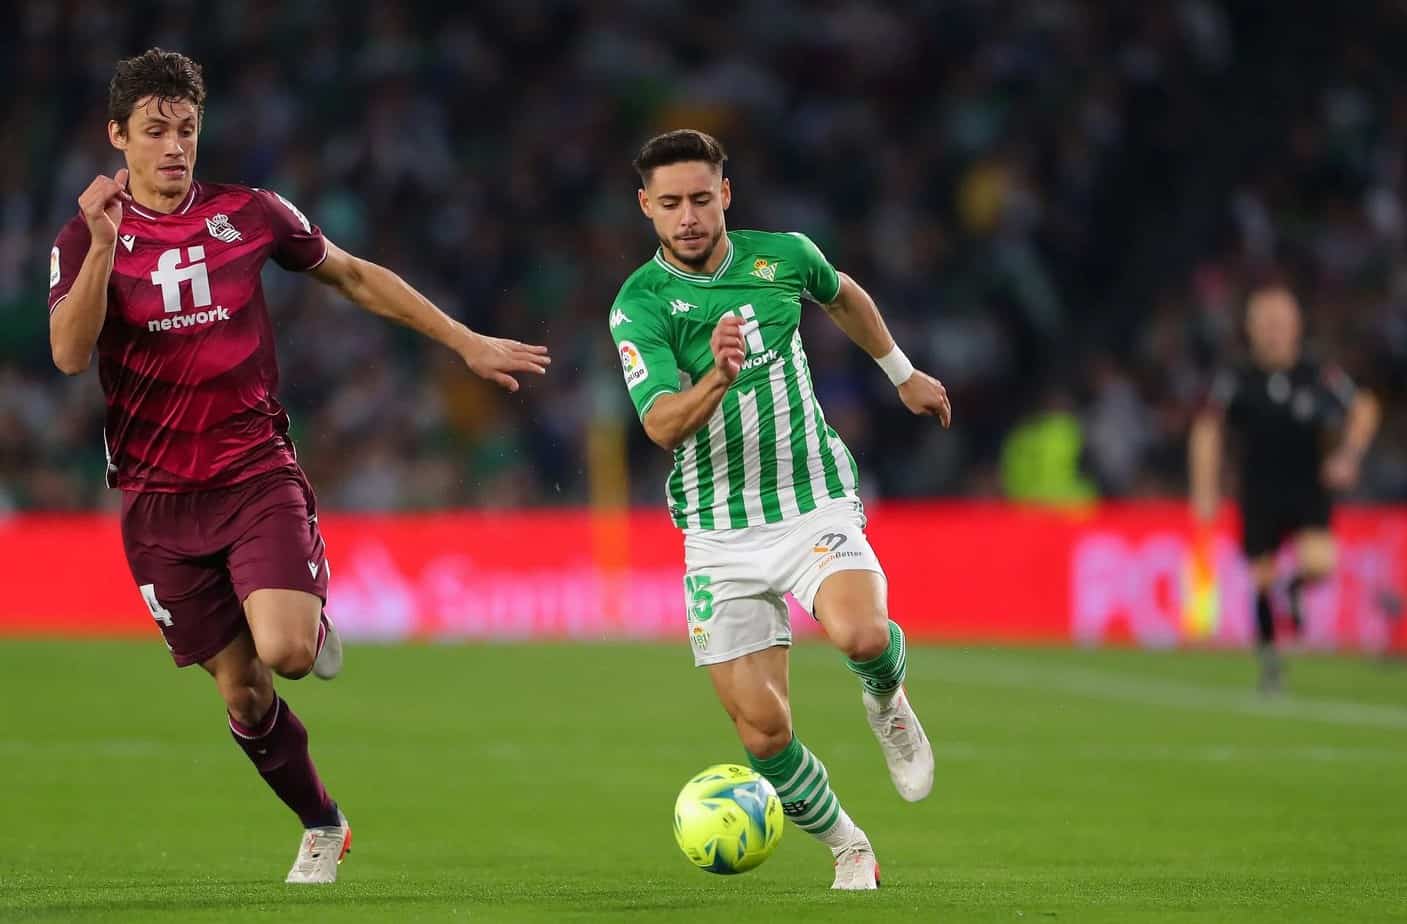 Real Sociedad vs. Betis – Betting Odds and Free Pick